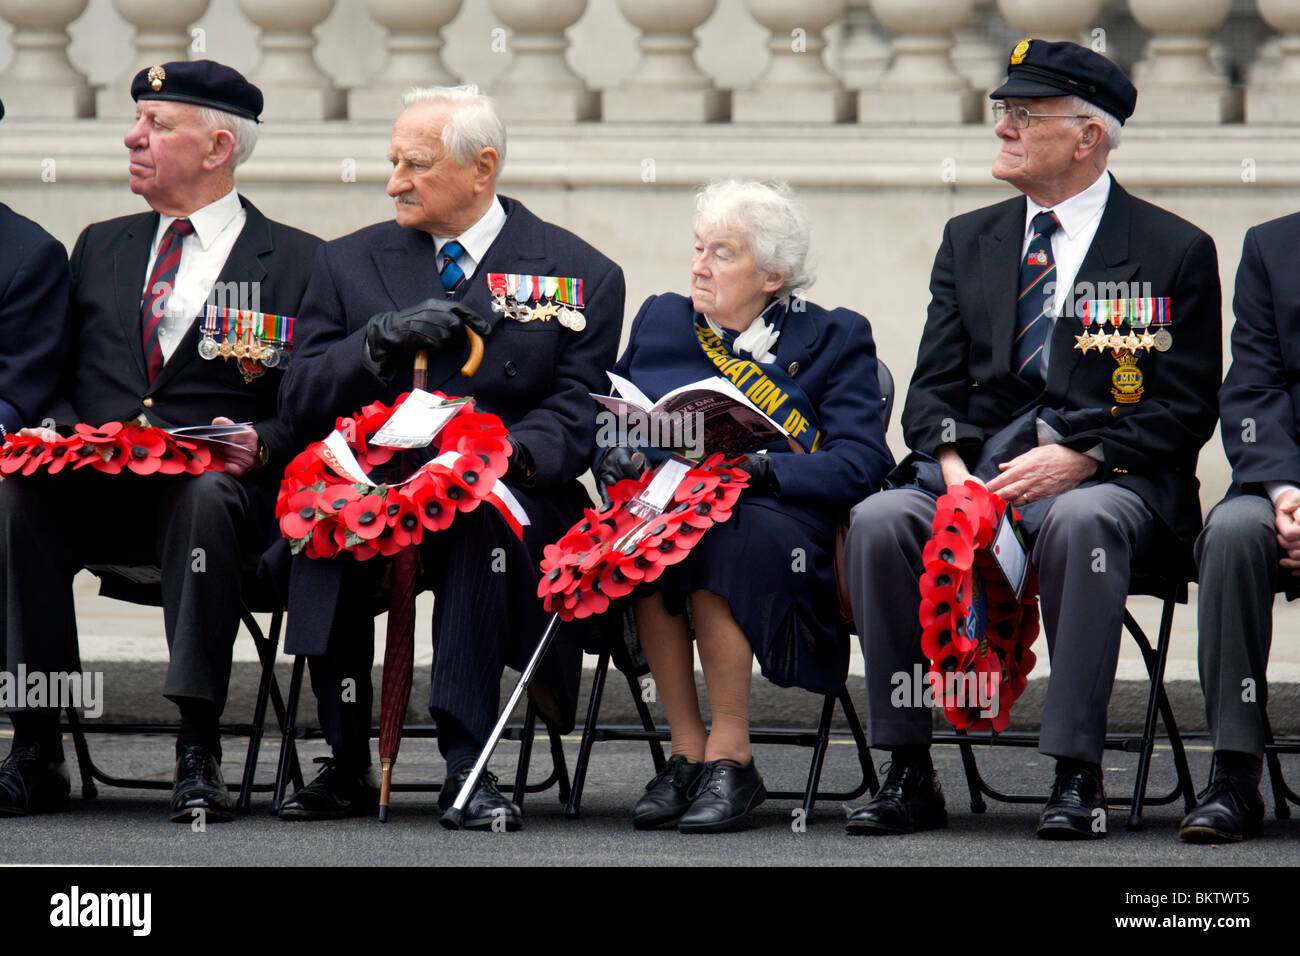 Veteran's representatives wait with wreaths before the VE Day service in Whitehall, London Stock Photo